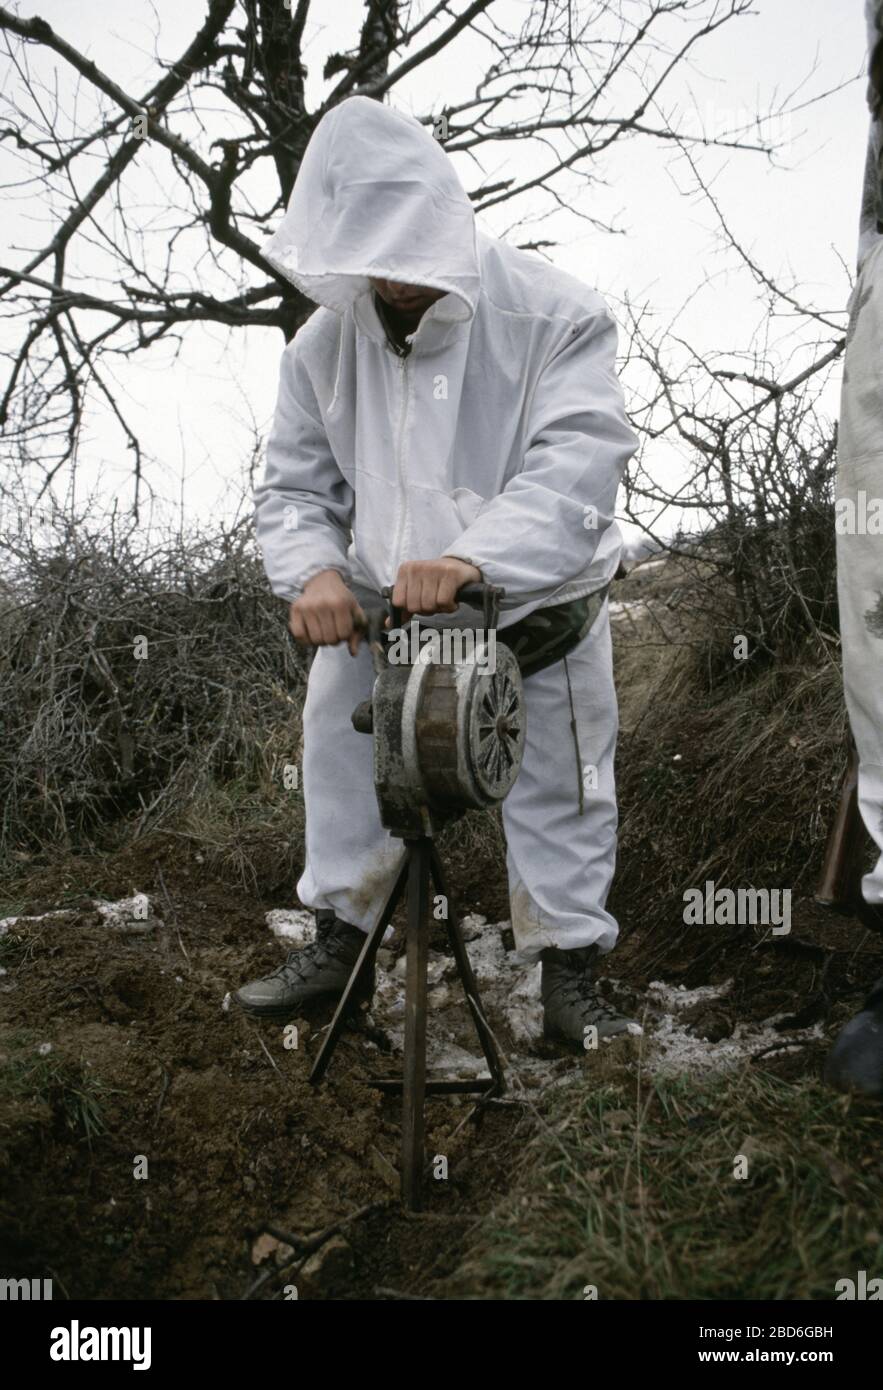 26th January 1994 During the war in central Bosnia: a soldier of the HVO's Rama Brigade turns a hand-cranked air-raid siren in the Bosnian Muslim village of Here, captured two days earlier. Stock Photo